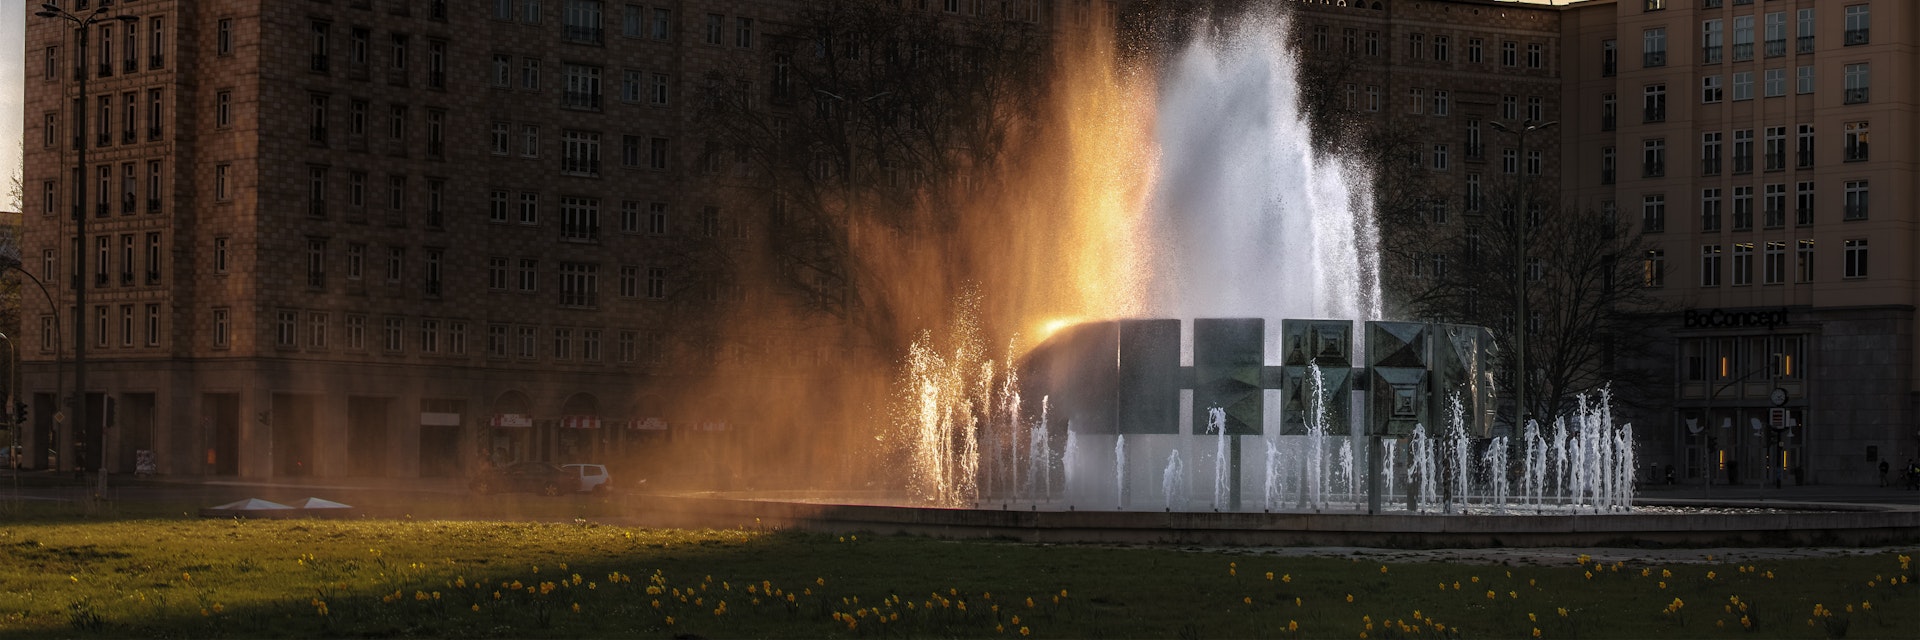 500px Photo ID: 109170205 - The grand fountain in Karl-Marx-Allee, Strausbergerplatz, .The setting sun colours the spray.